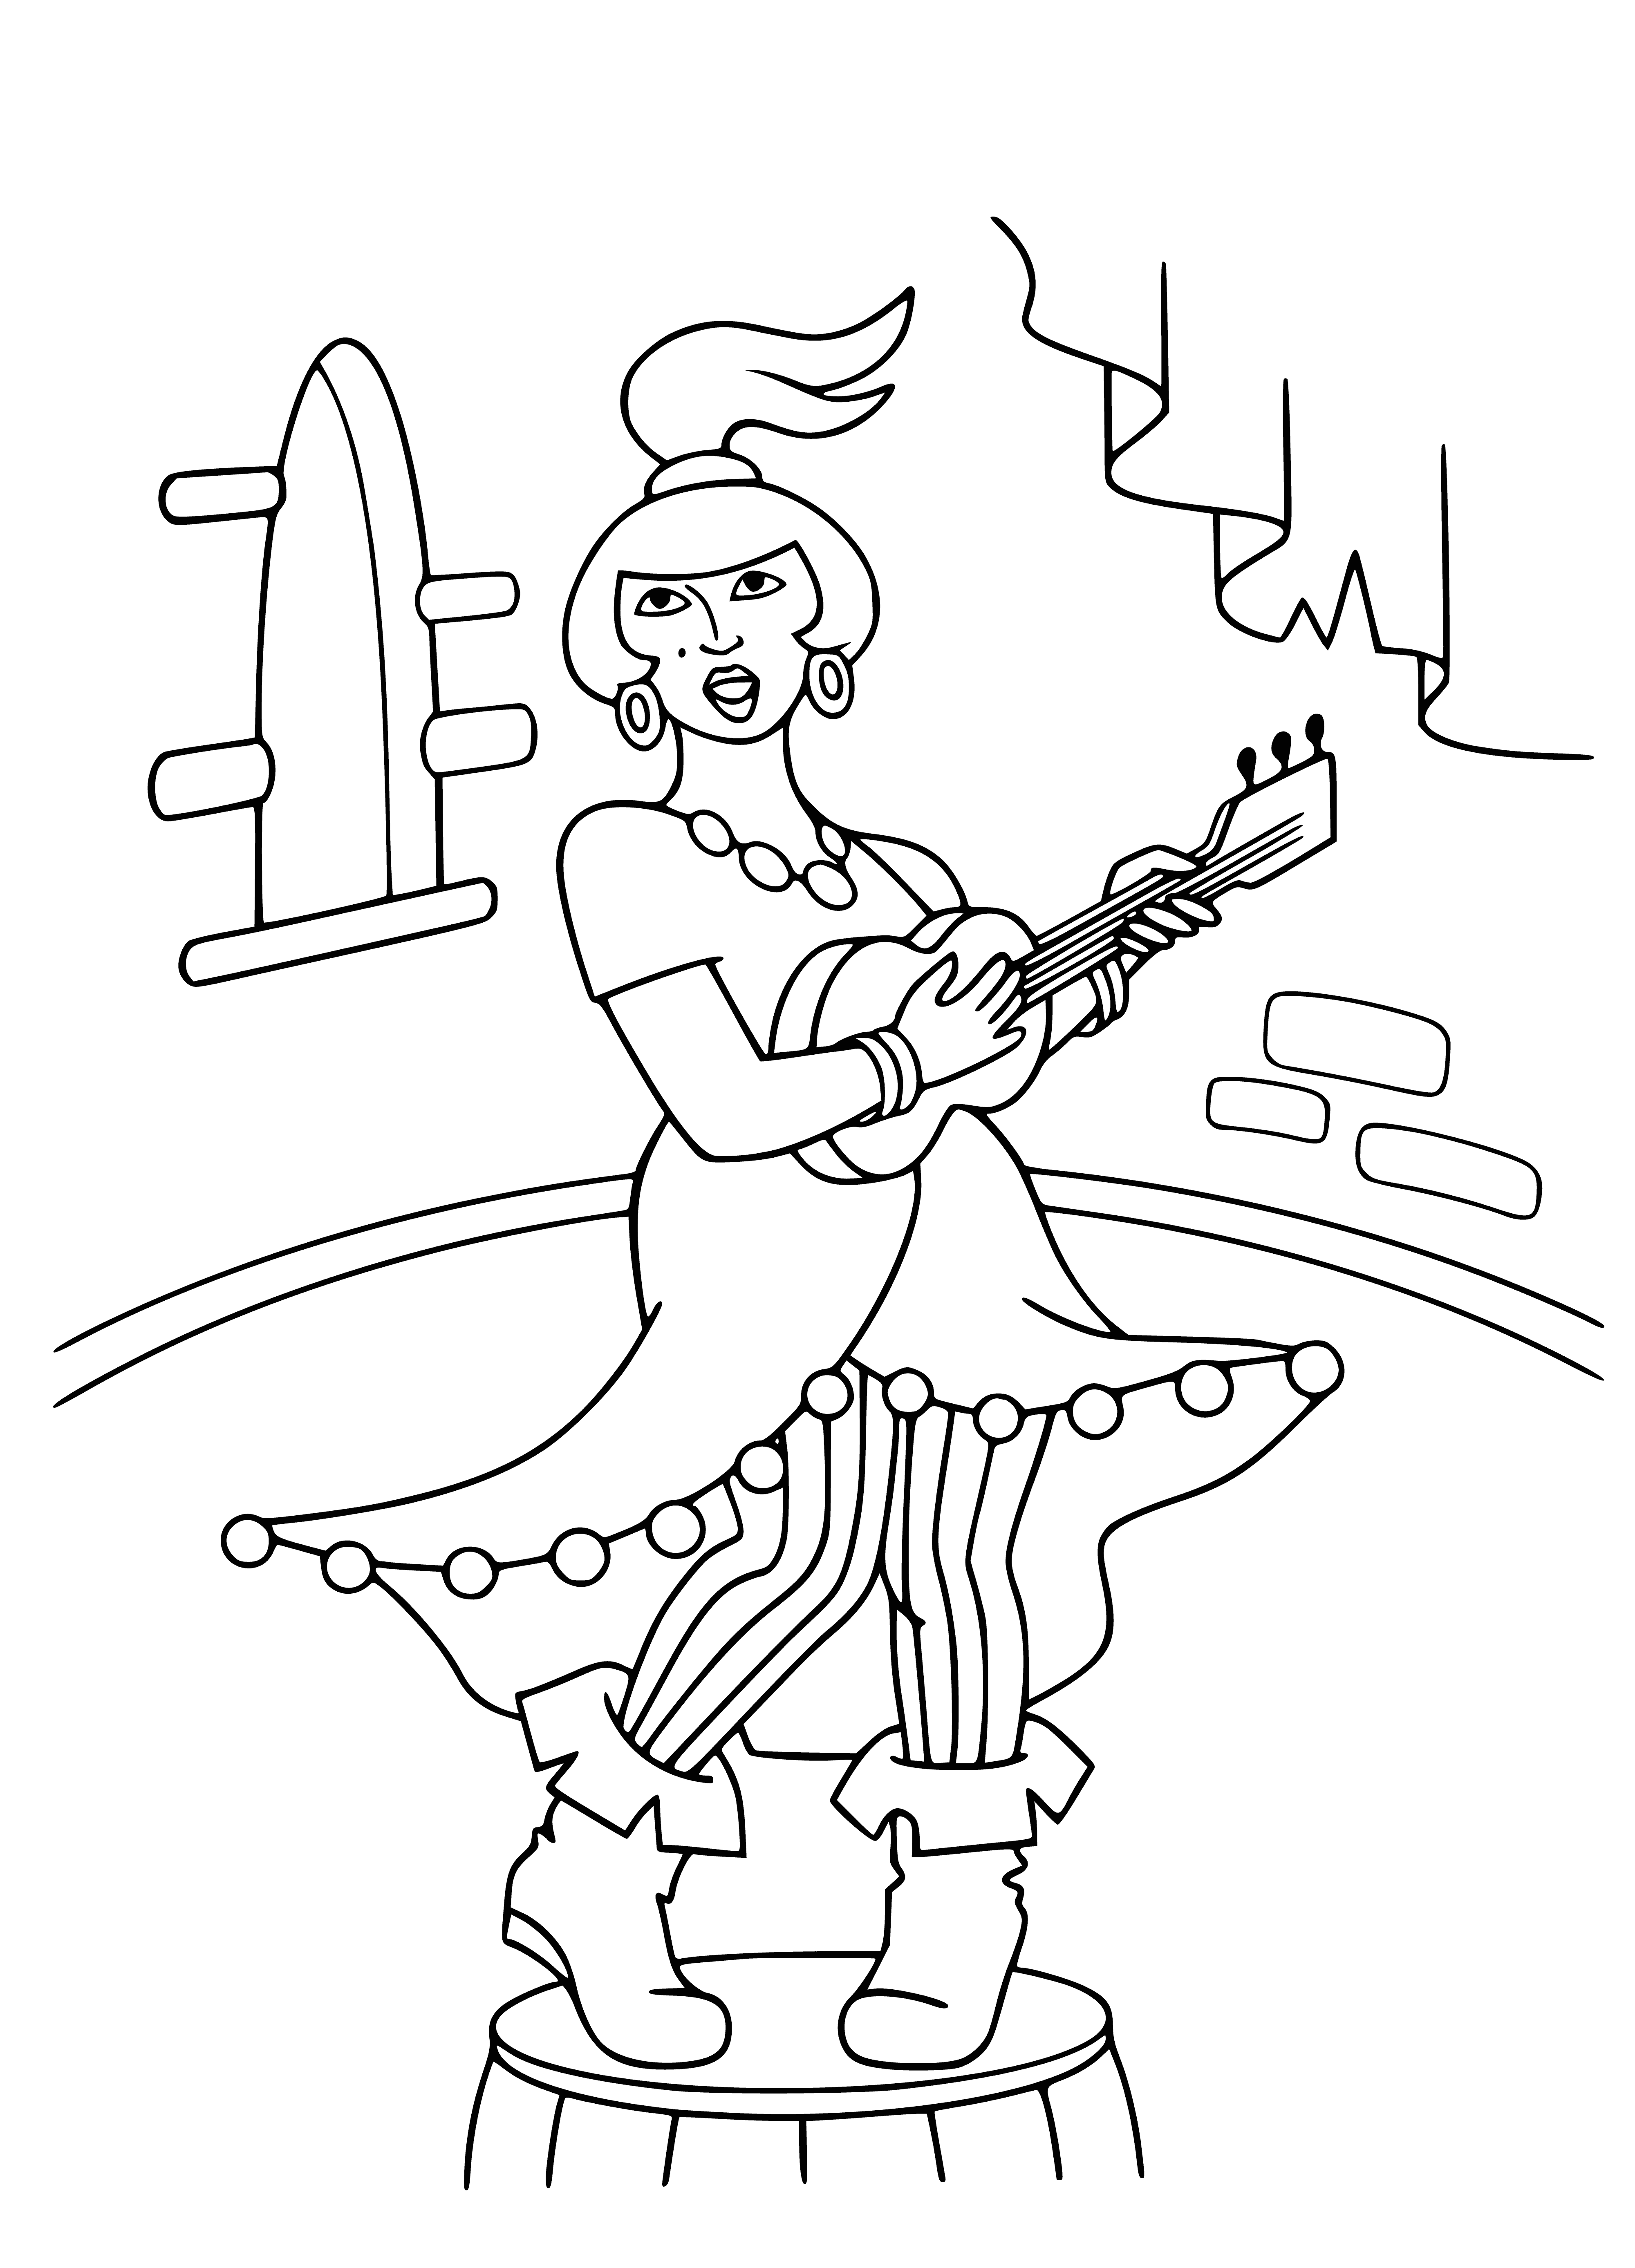 coloring page: Five animals (donkey, dog, cat, rooster, mouse) standing on hind legs, looking left, against city backdrop.